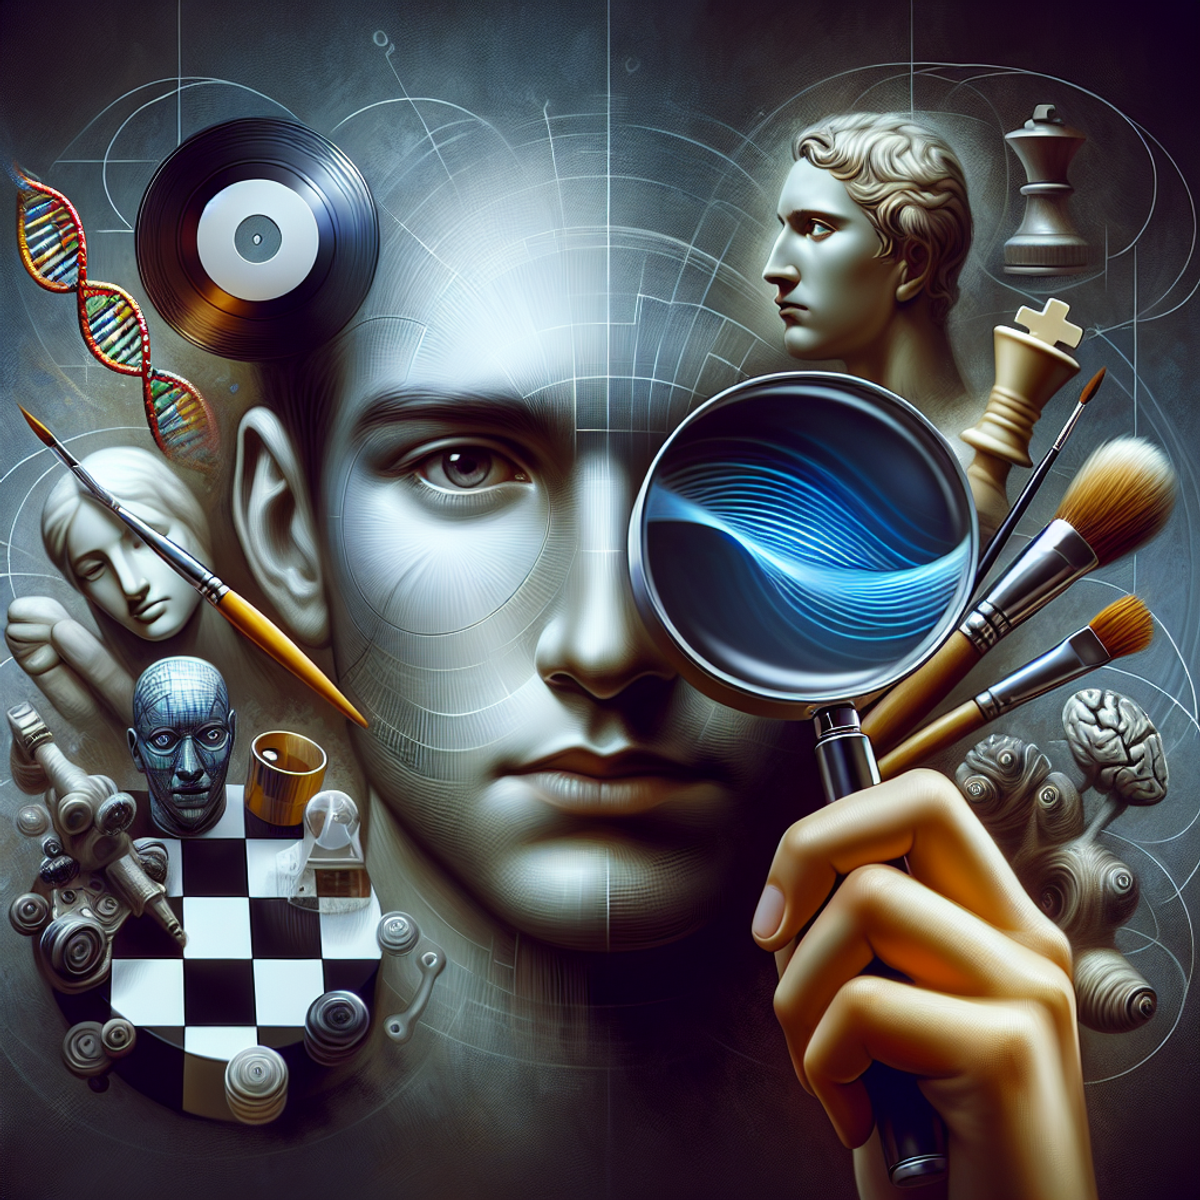 A person with neutral expression holds a magnifying glass, examining a chess piece, vinyl record, paintbrush, and model DNA helix on a table.